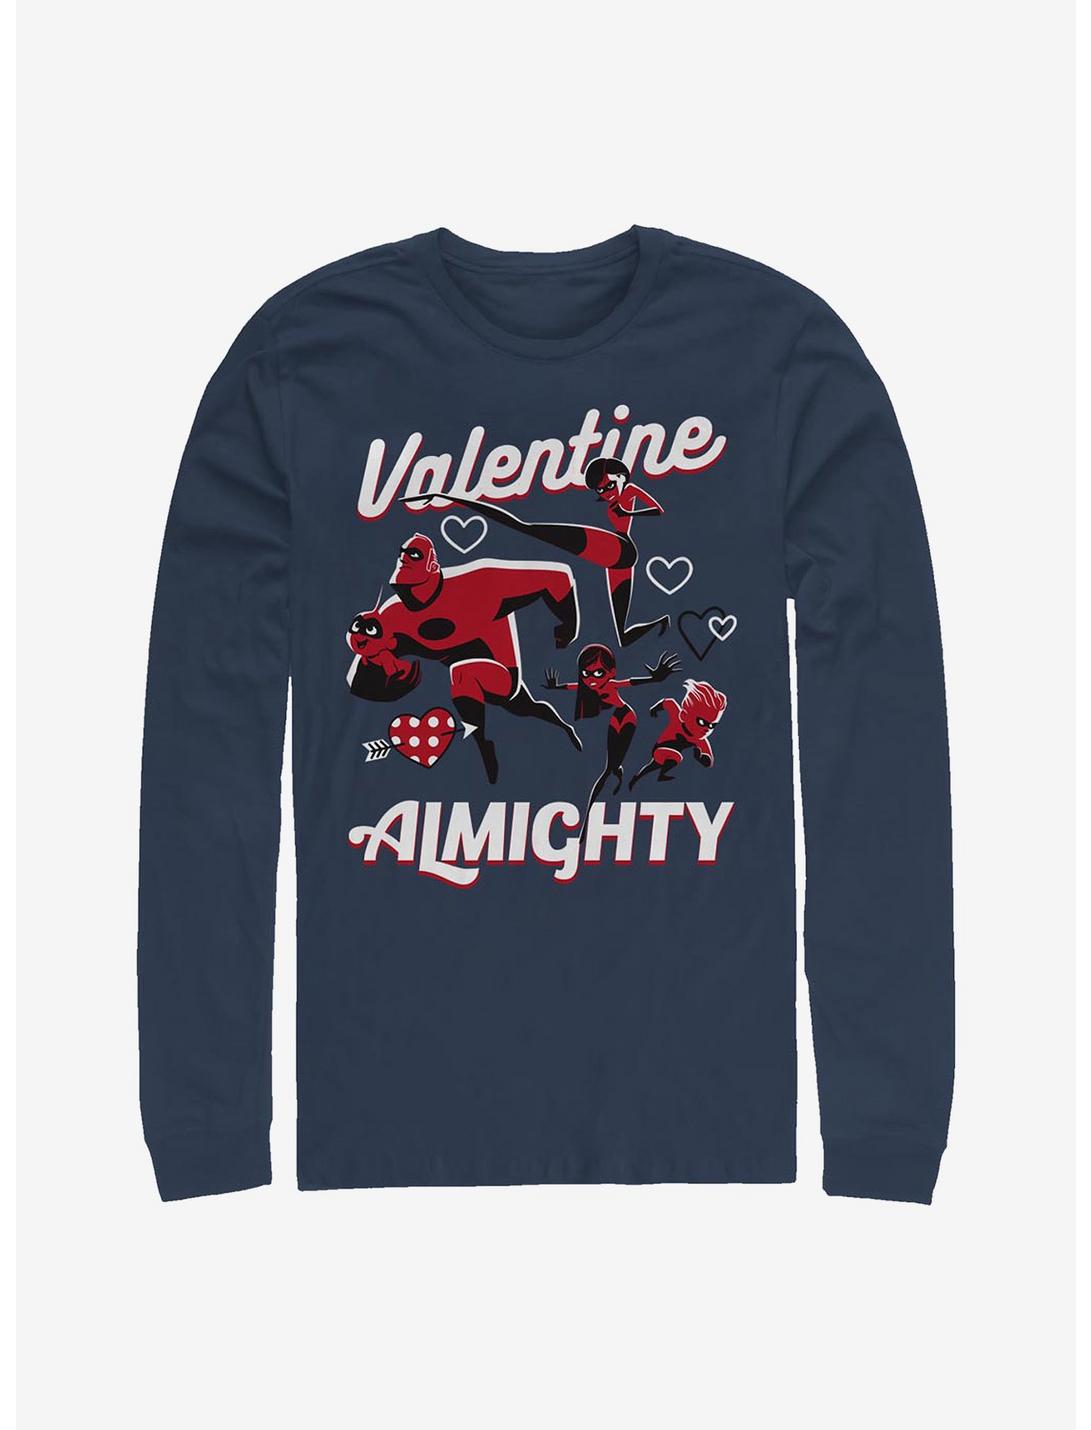 Disney Pixar The Incredibles Valentine Almighty Long-Sleeve T-Shirt, NAVY, hi-res